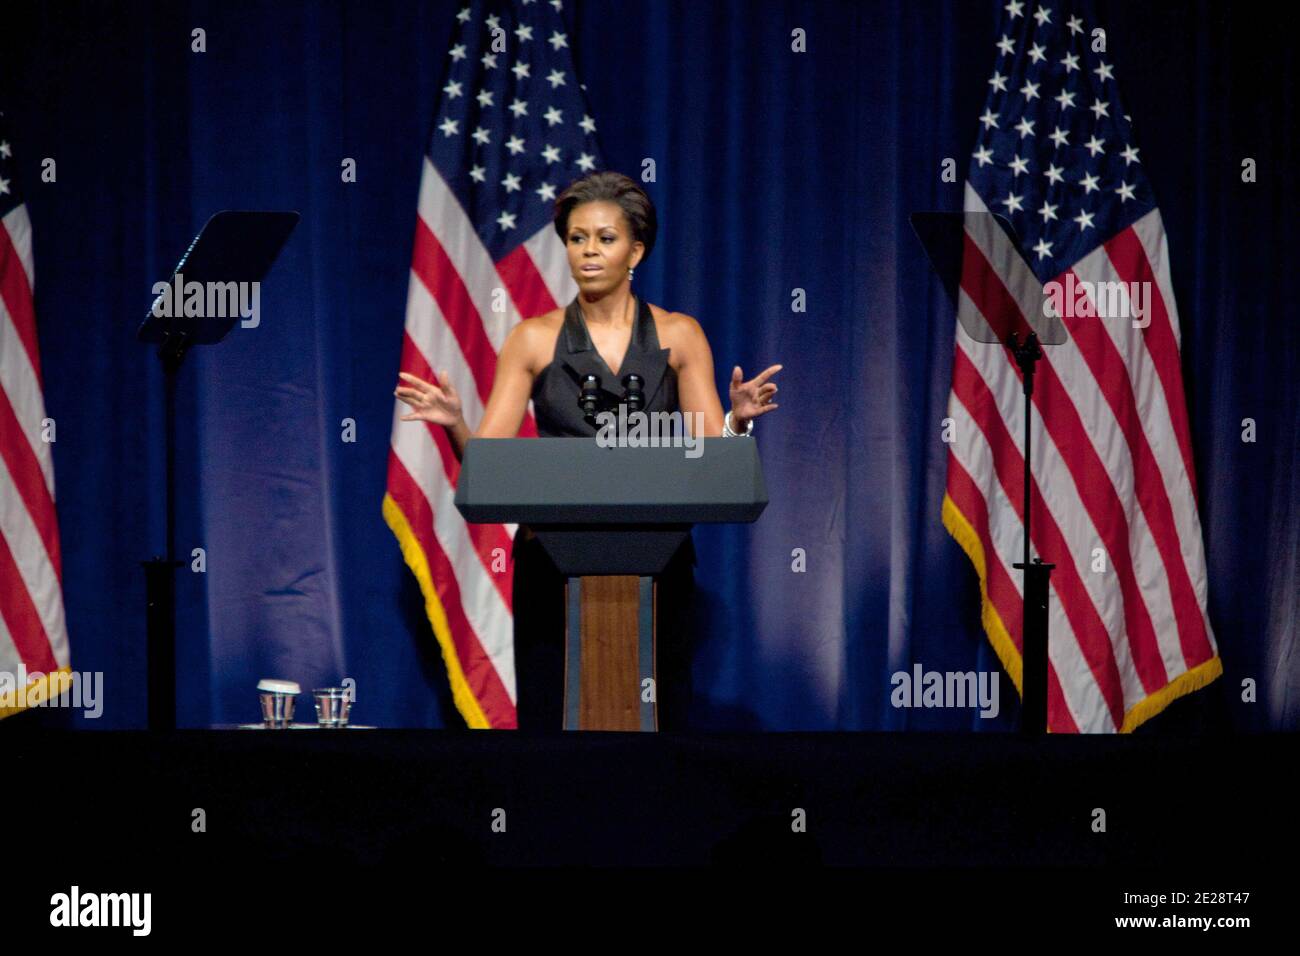 First Lady Michelle Obama introduces the president Barack Obama at a ...